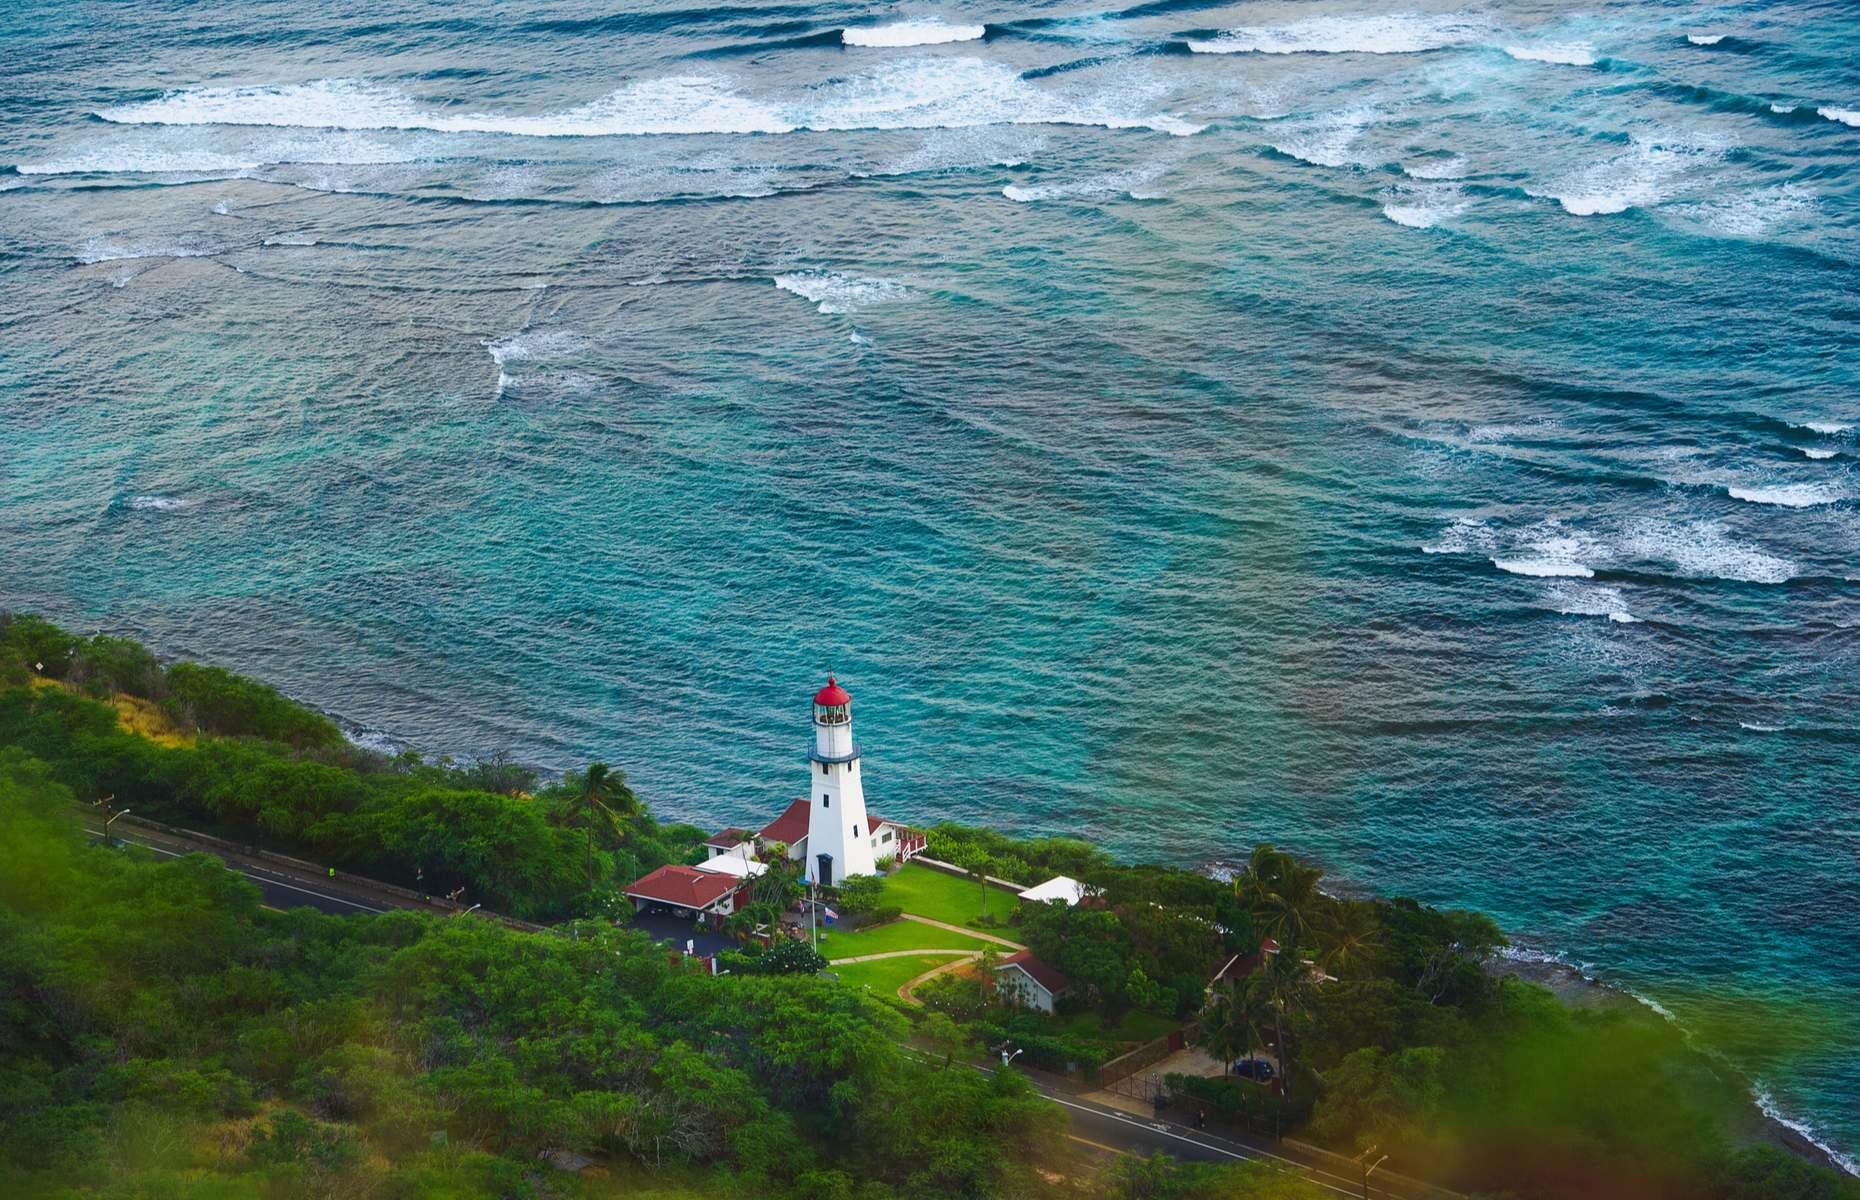 <p>Recognize this quaint little lighthouse? Diamond Head Lighthouse in Oahu, Hawaii was memorialized on a US postage stamp in 2007. Sitting on the southwestern edge of Diamond Head, a 3,520-foot (1,073m) wide crater formed by a volcanic eruption 300,000 years ago, the lighthouse has stood guard over the coast since 1899, when it was built following two shipwrecks.</p>  <p><a href="https://www.loveexploring.com/gallerylist/69708/american-islands-that-arent-in-north-america"><strong>Discover these American islands that aren't in North America</strong></a></p>